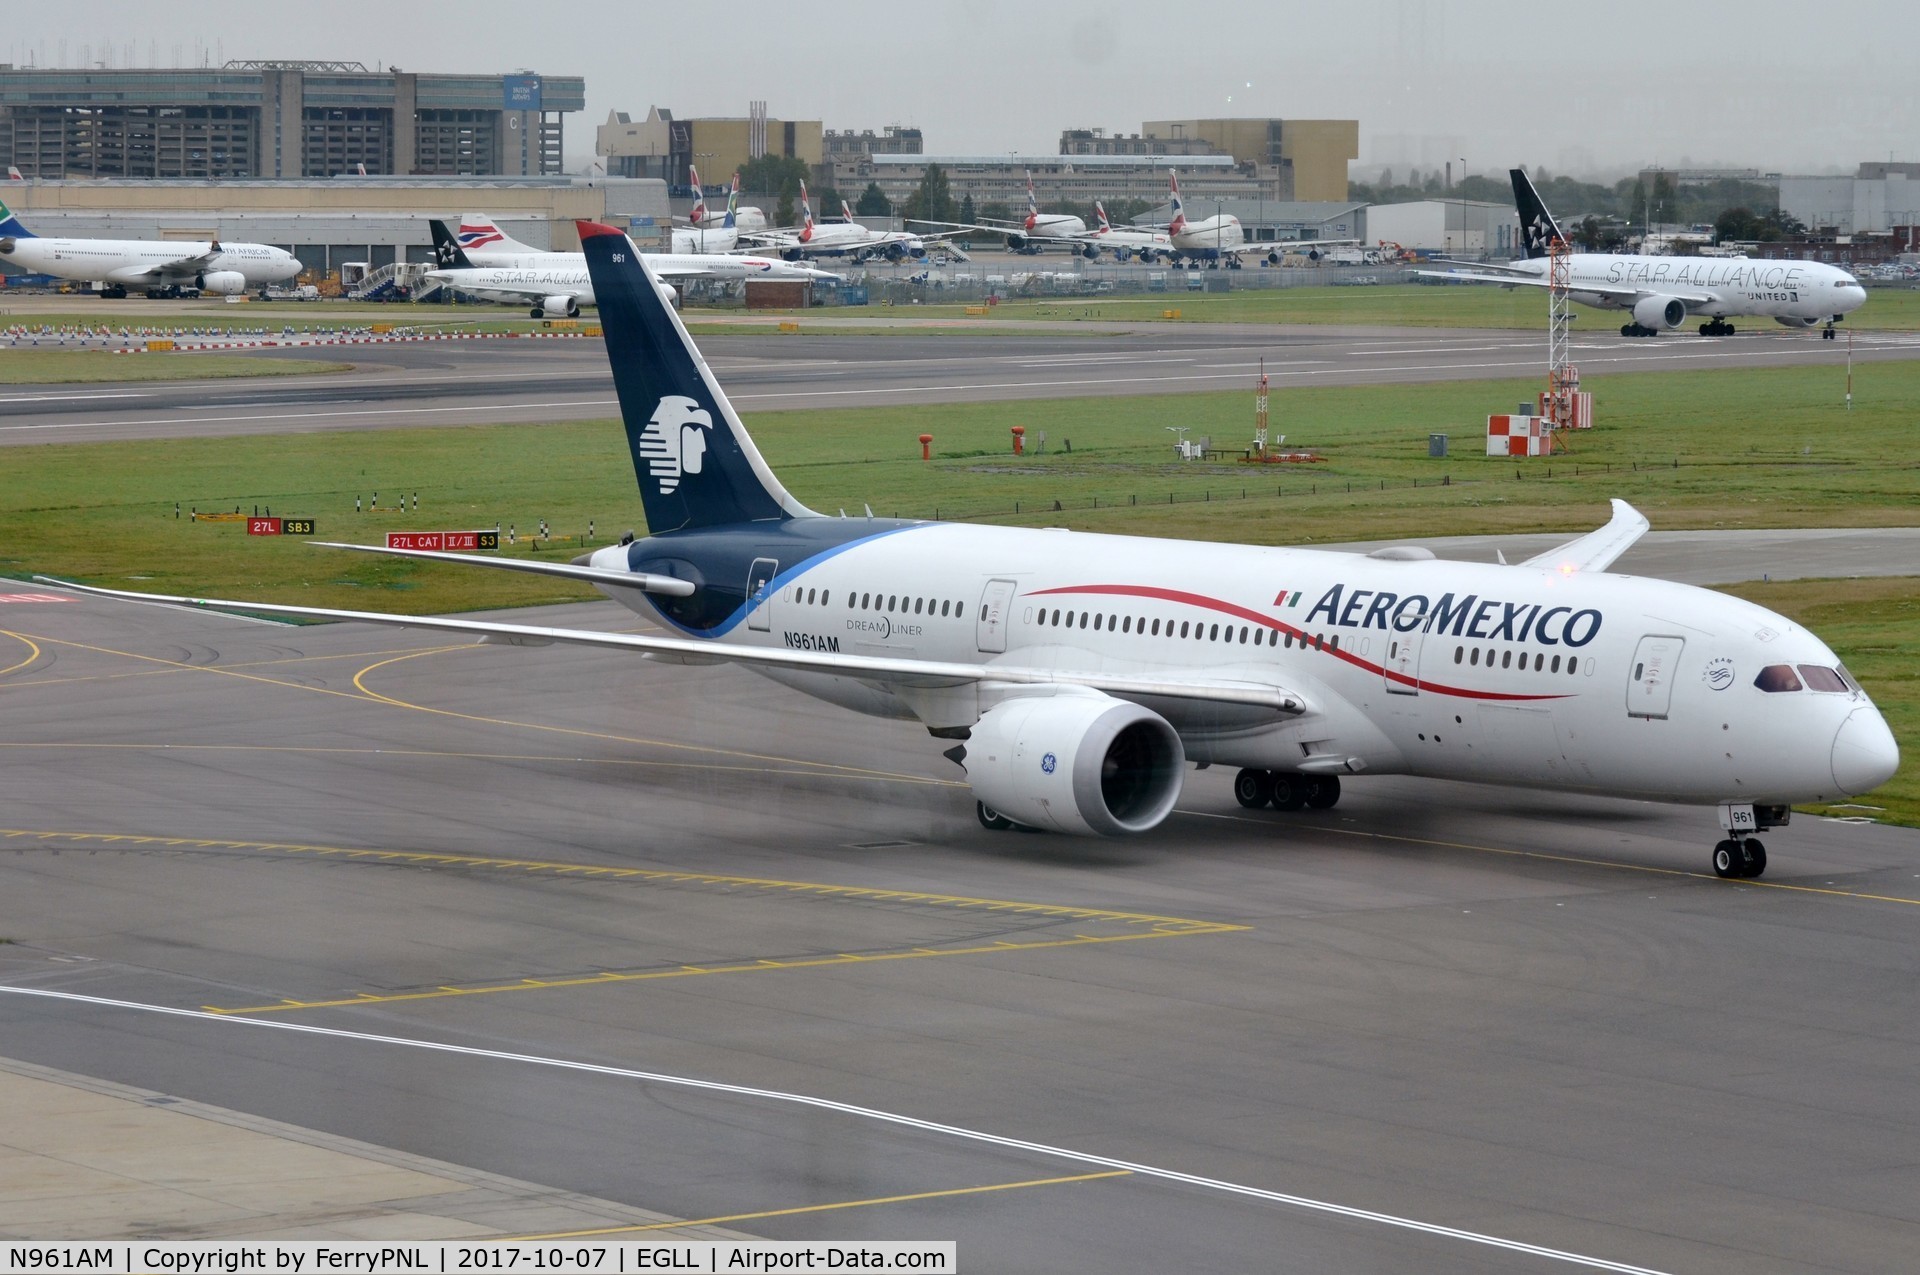 N961AM, 2013 Boeing 787-8 Dreamliner C/N 35306, Aeromexico B788 finding its way to the gate.